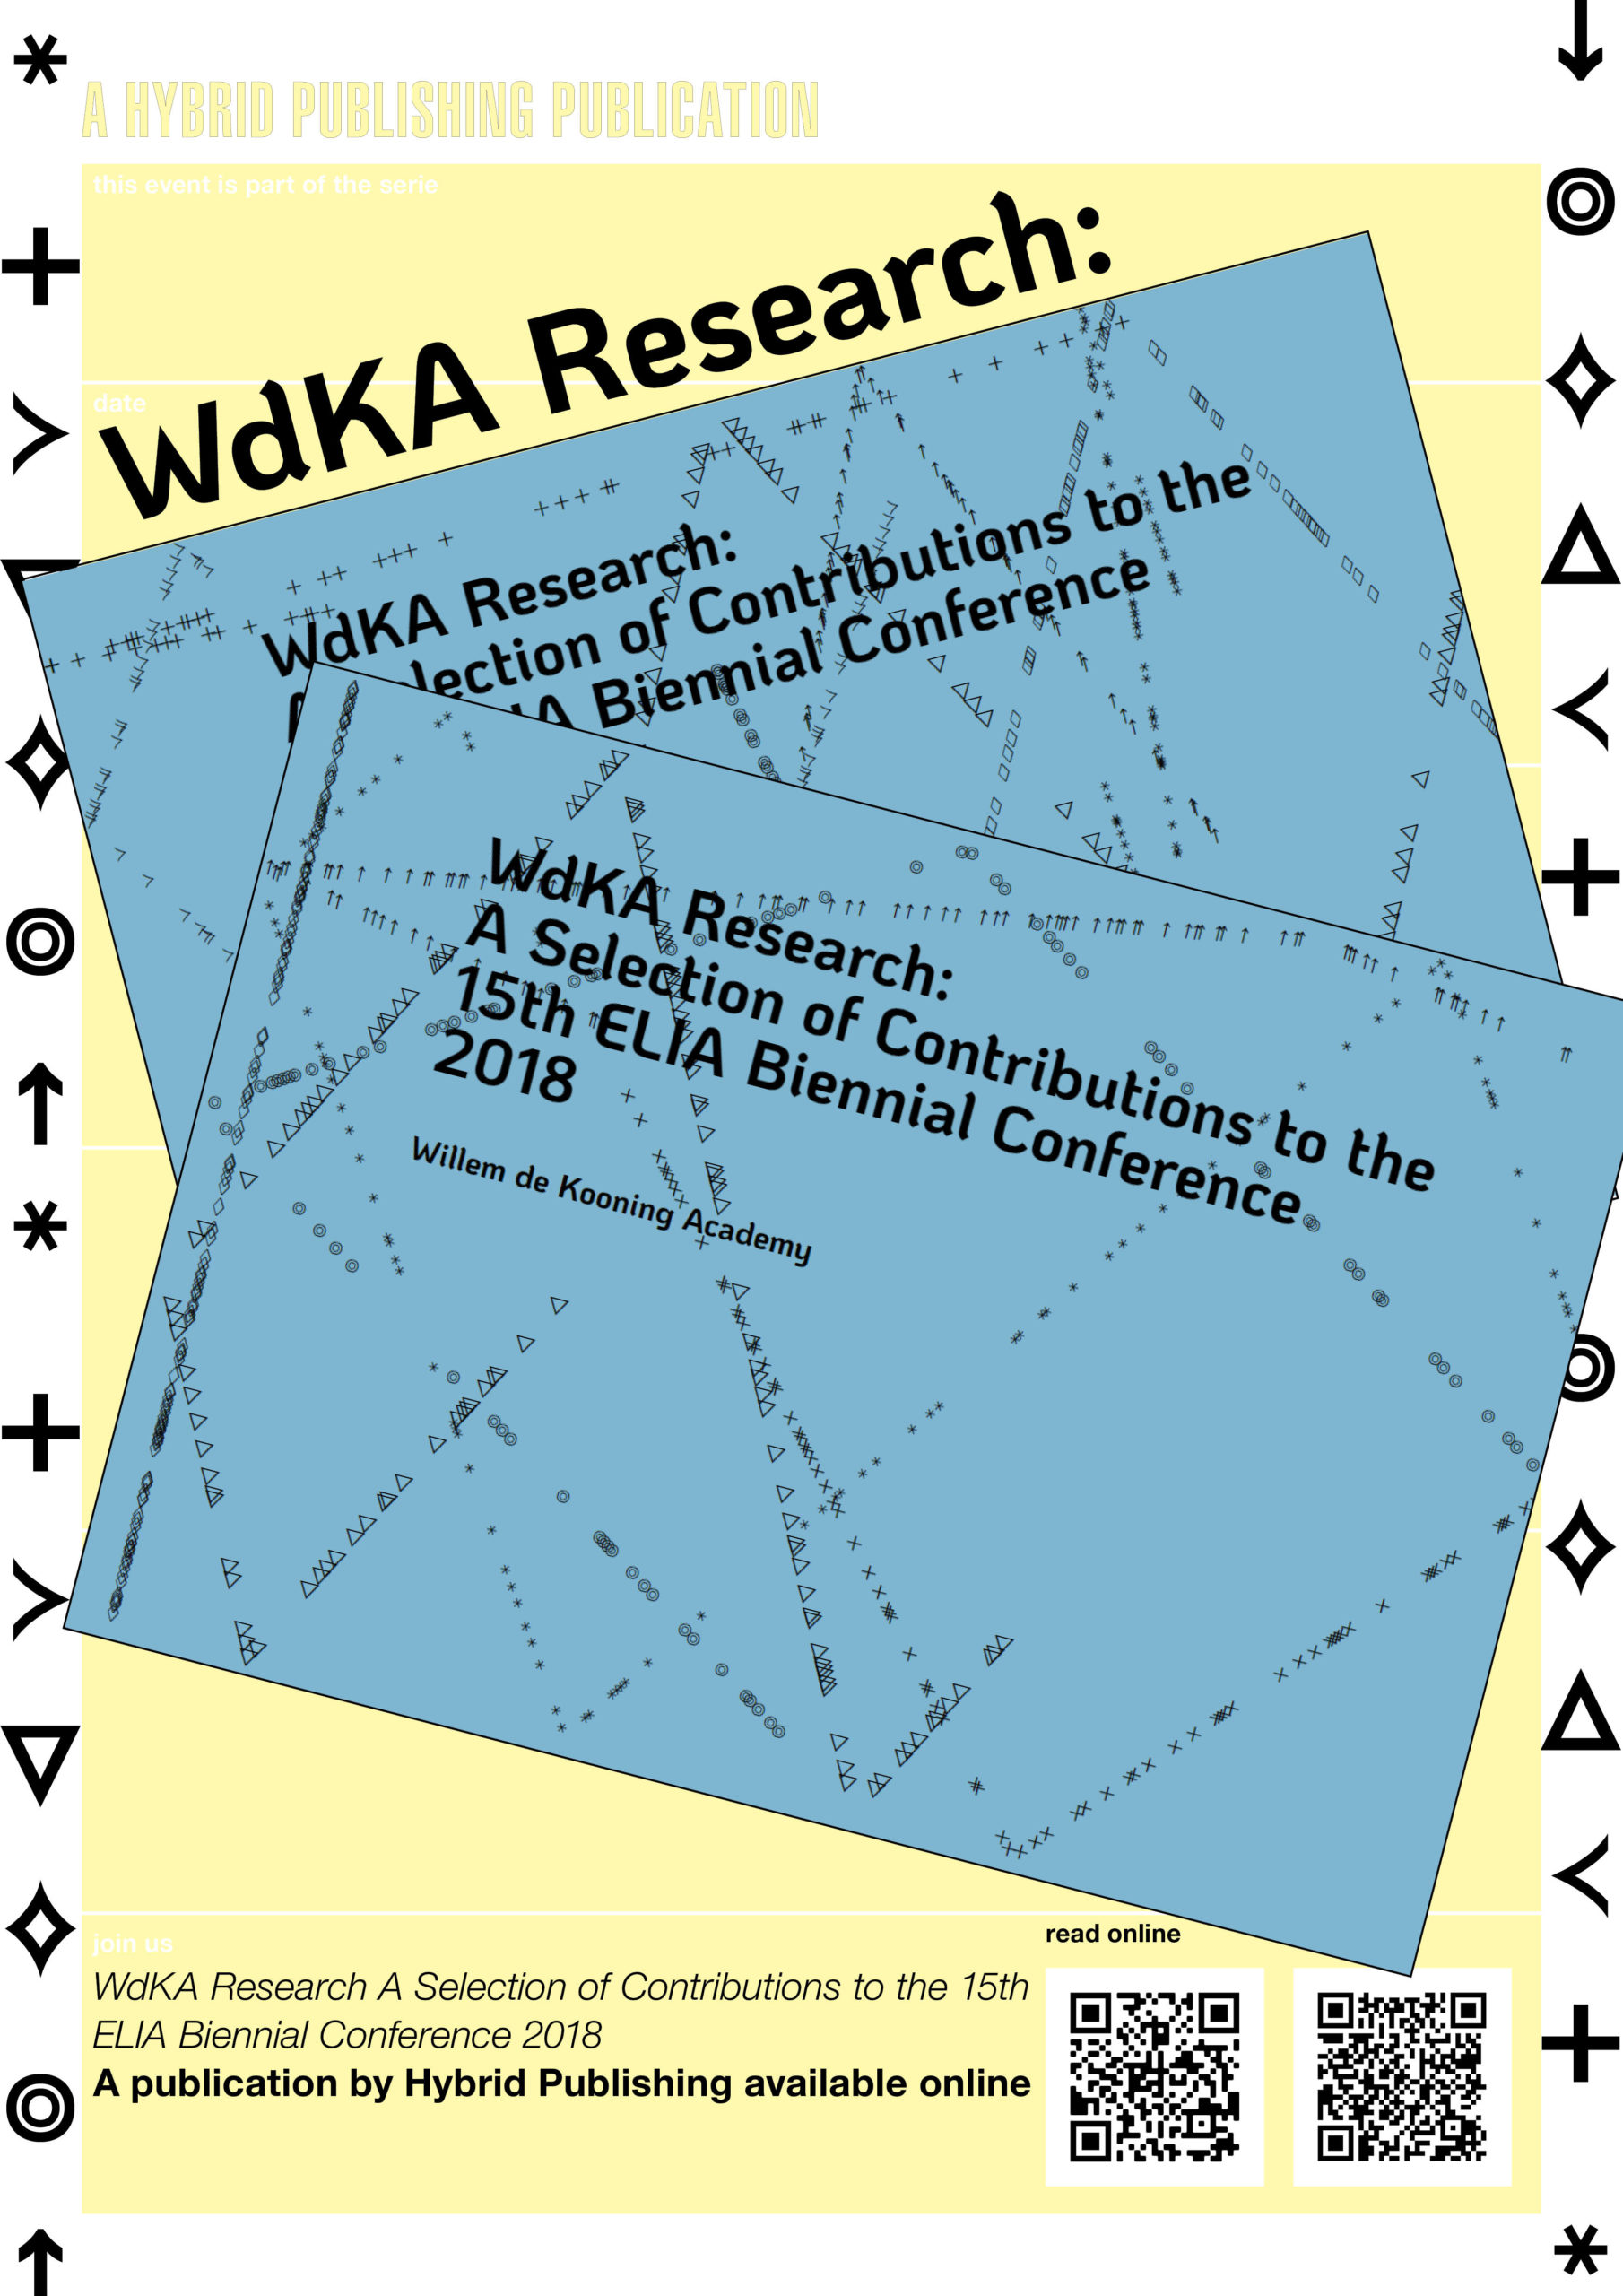 WdKA Research: A Selection of Contributions to the 15th Biennial Conference 2018